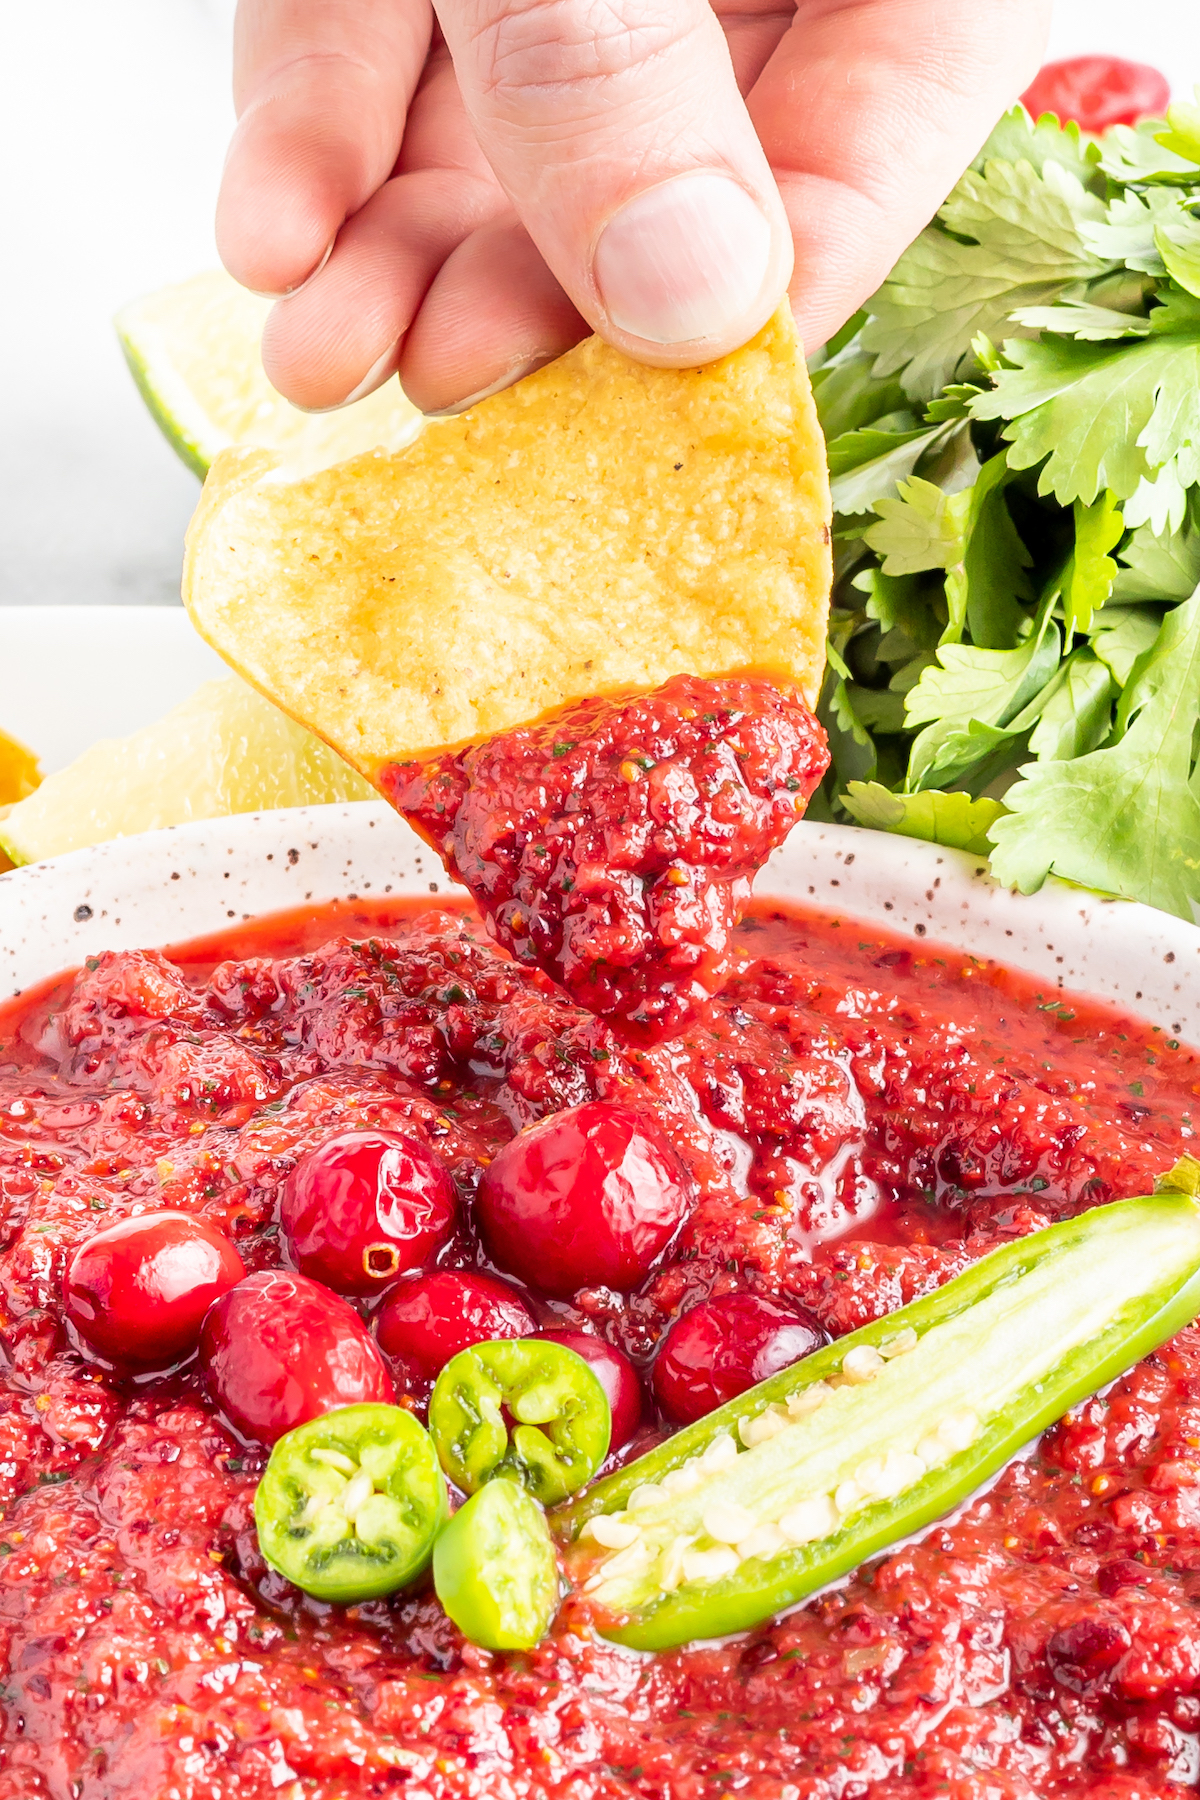 Close up of a hand holding up a tortilla chip that's been dunked in the cranberry salsa.